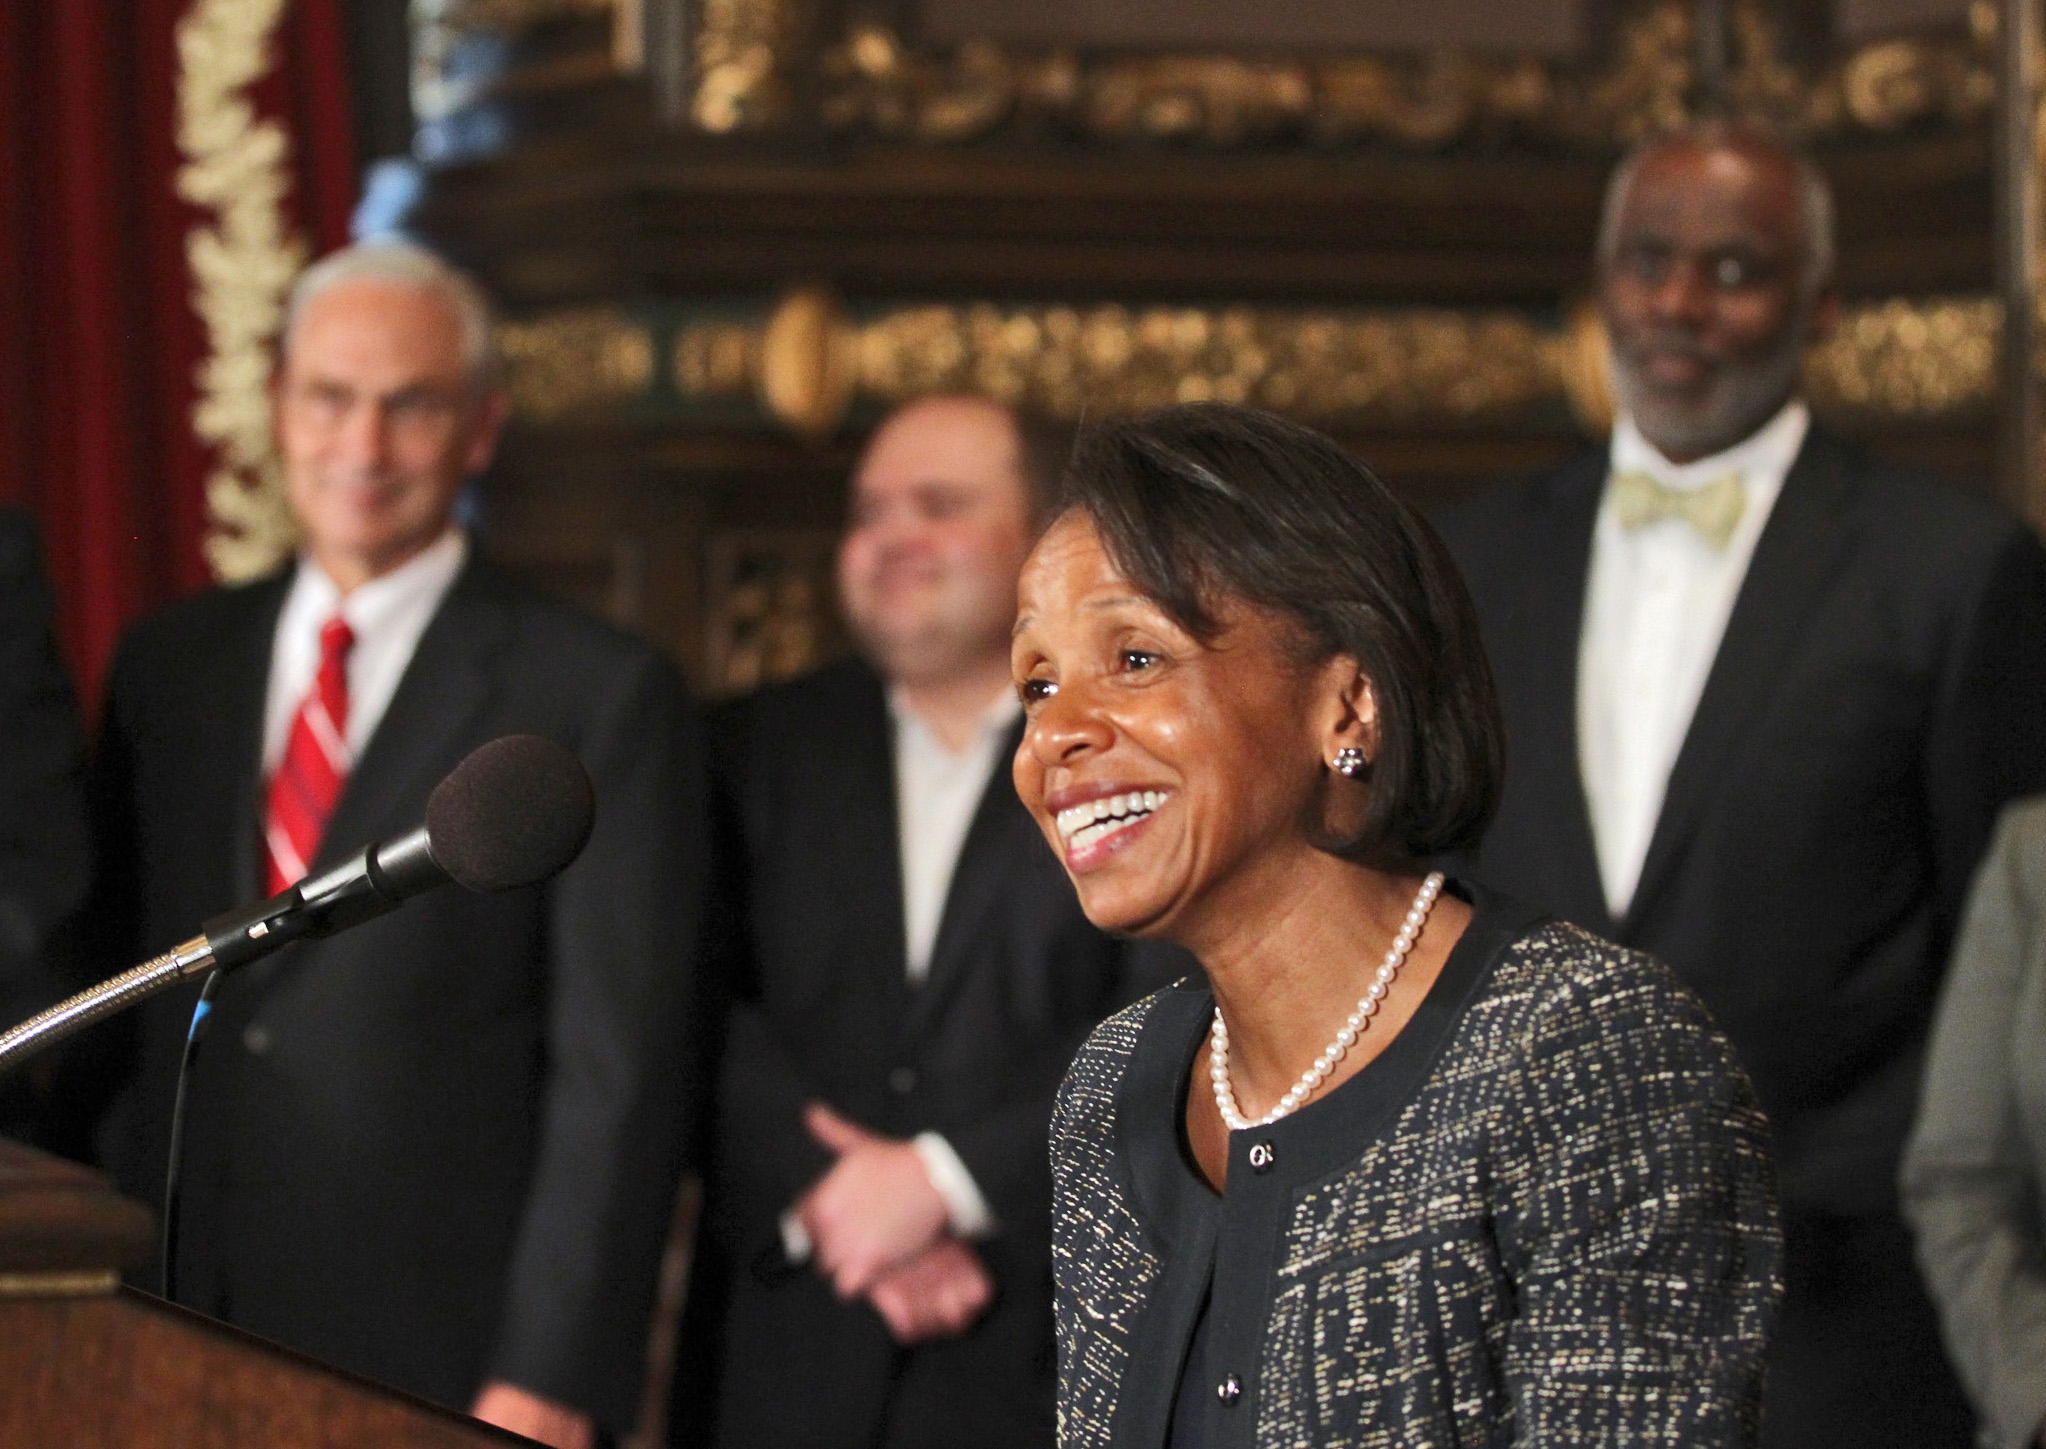 Judge Wilhelmina Wright is the first African-American woman to be appointed to the state's highest court.